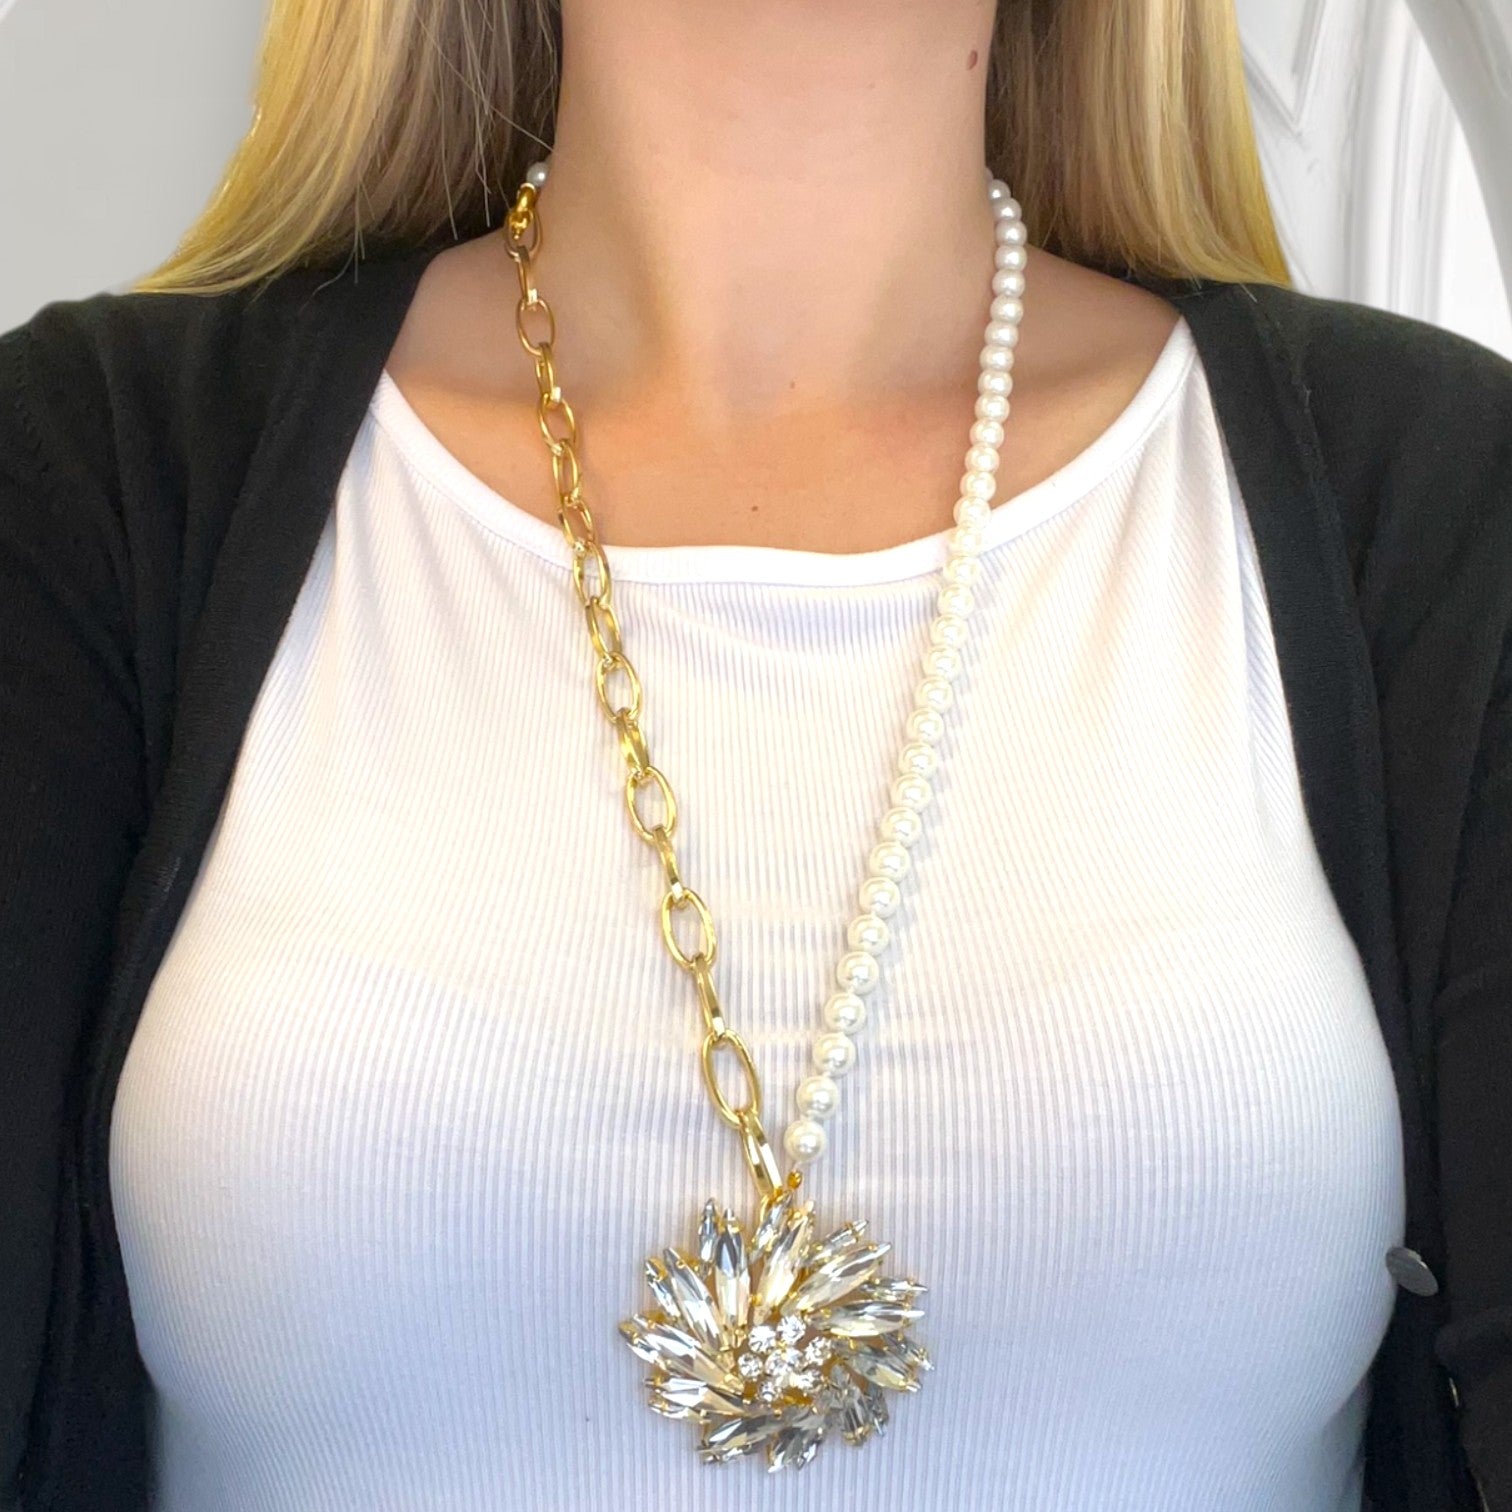 Show Stopper Rhinestone, Gold and Pearl Statement Necklace-Necklace